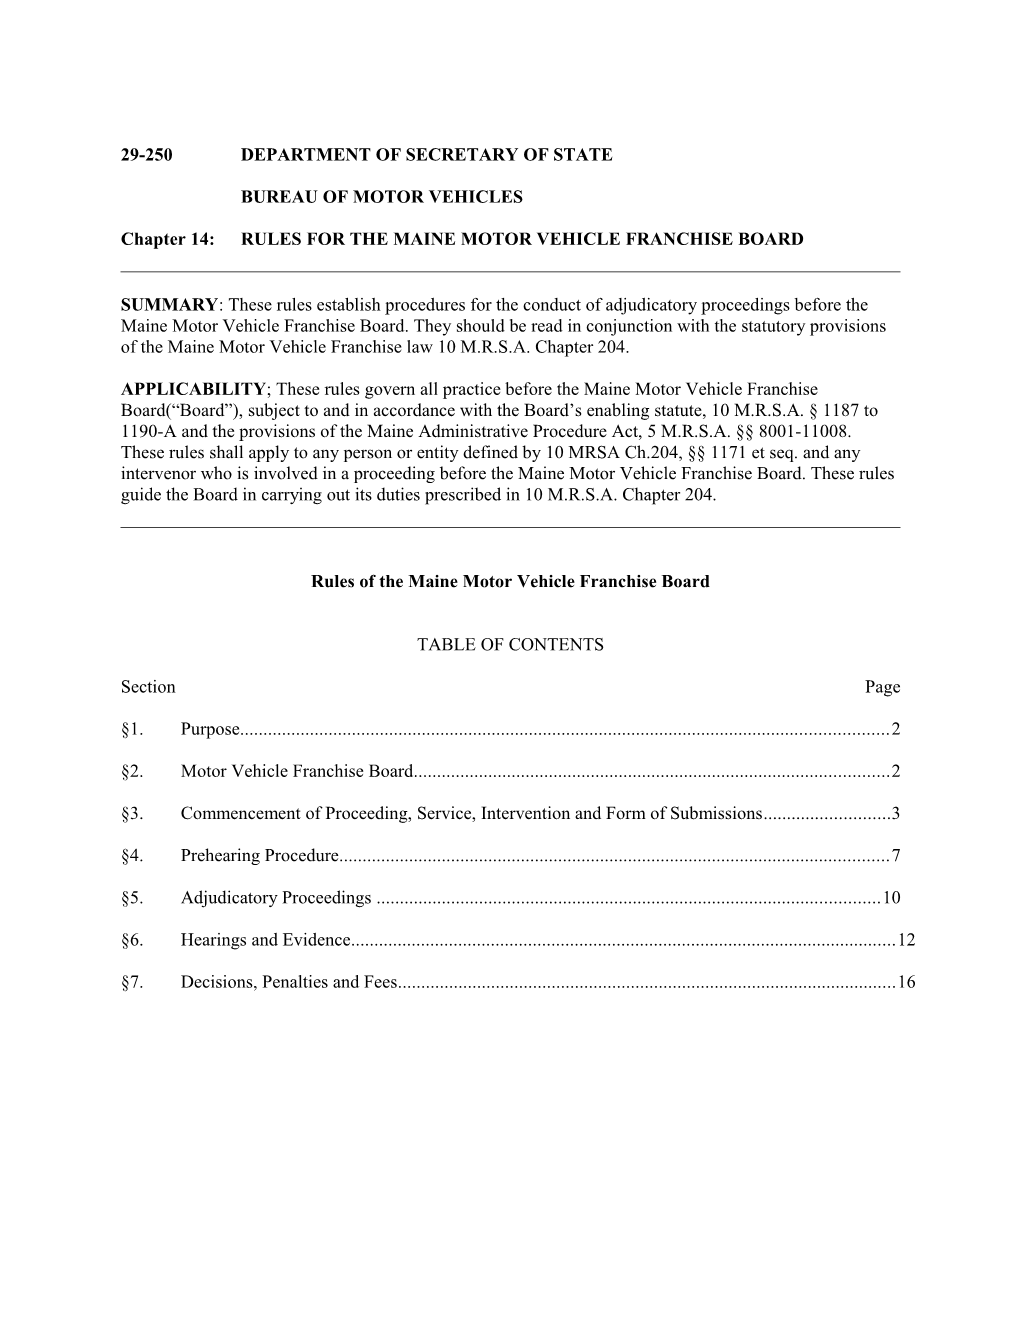 Chapter 14:RULES for the MAINE MOTOR VEHICLE FRANCHISE BOARD